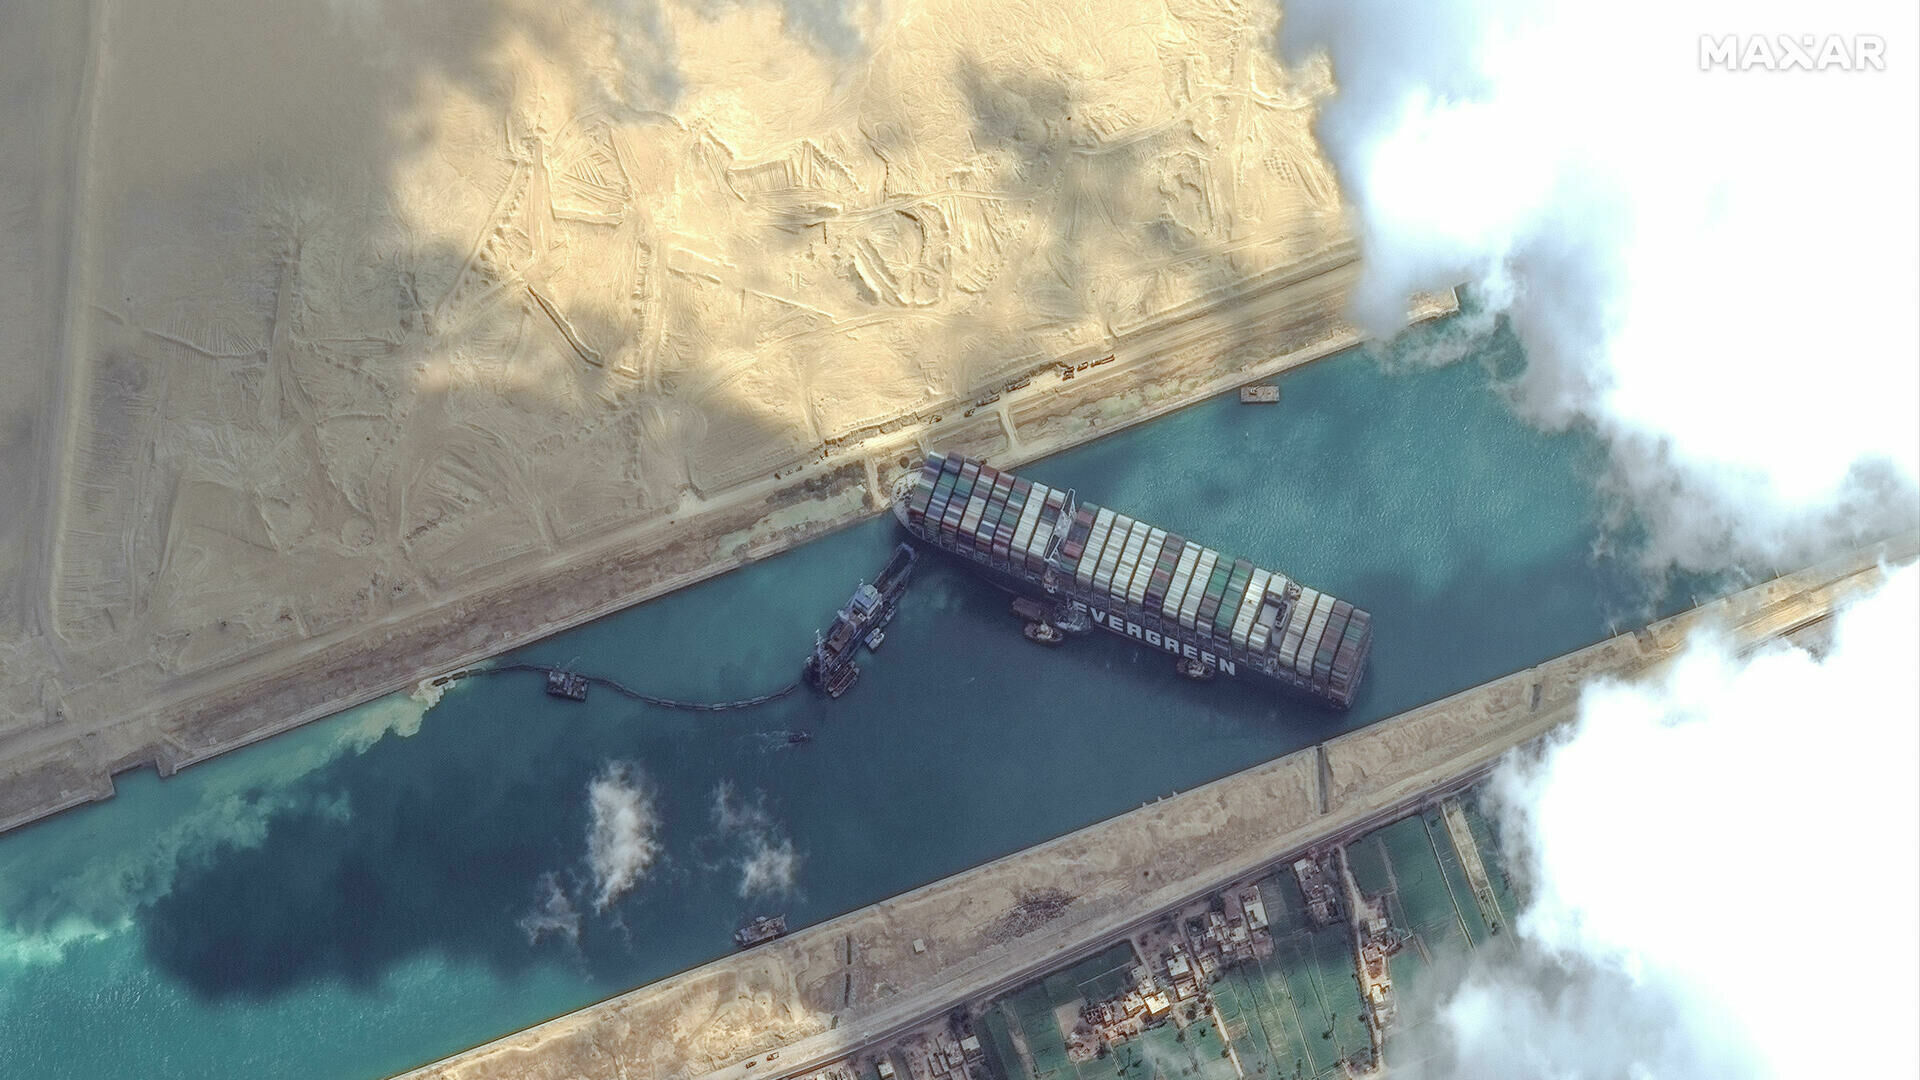 The ship that blocked the Suez Canal was removed from the shallows